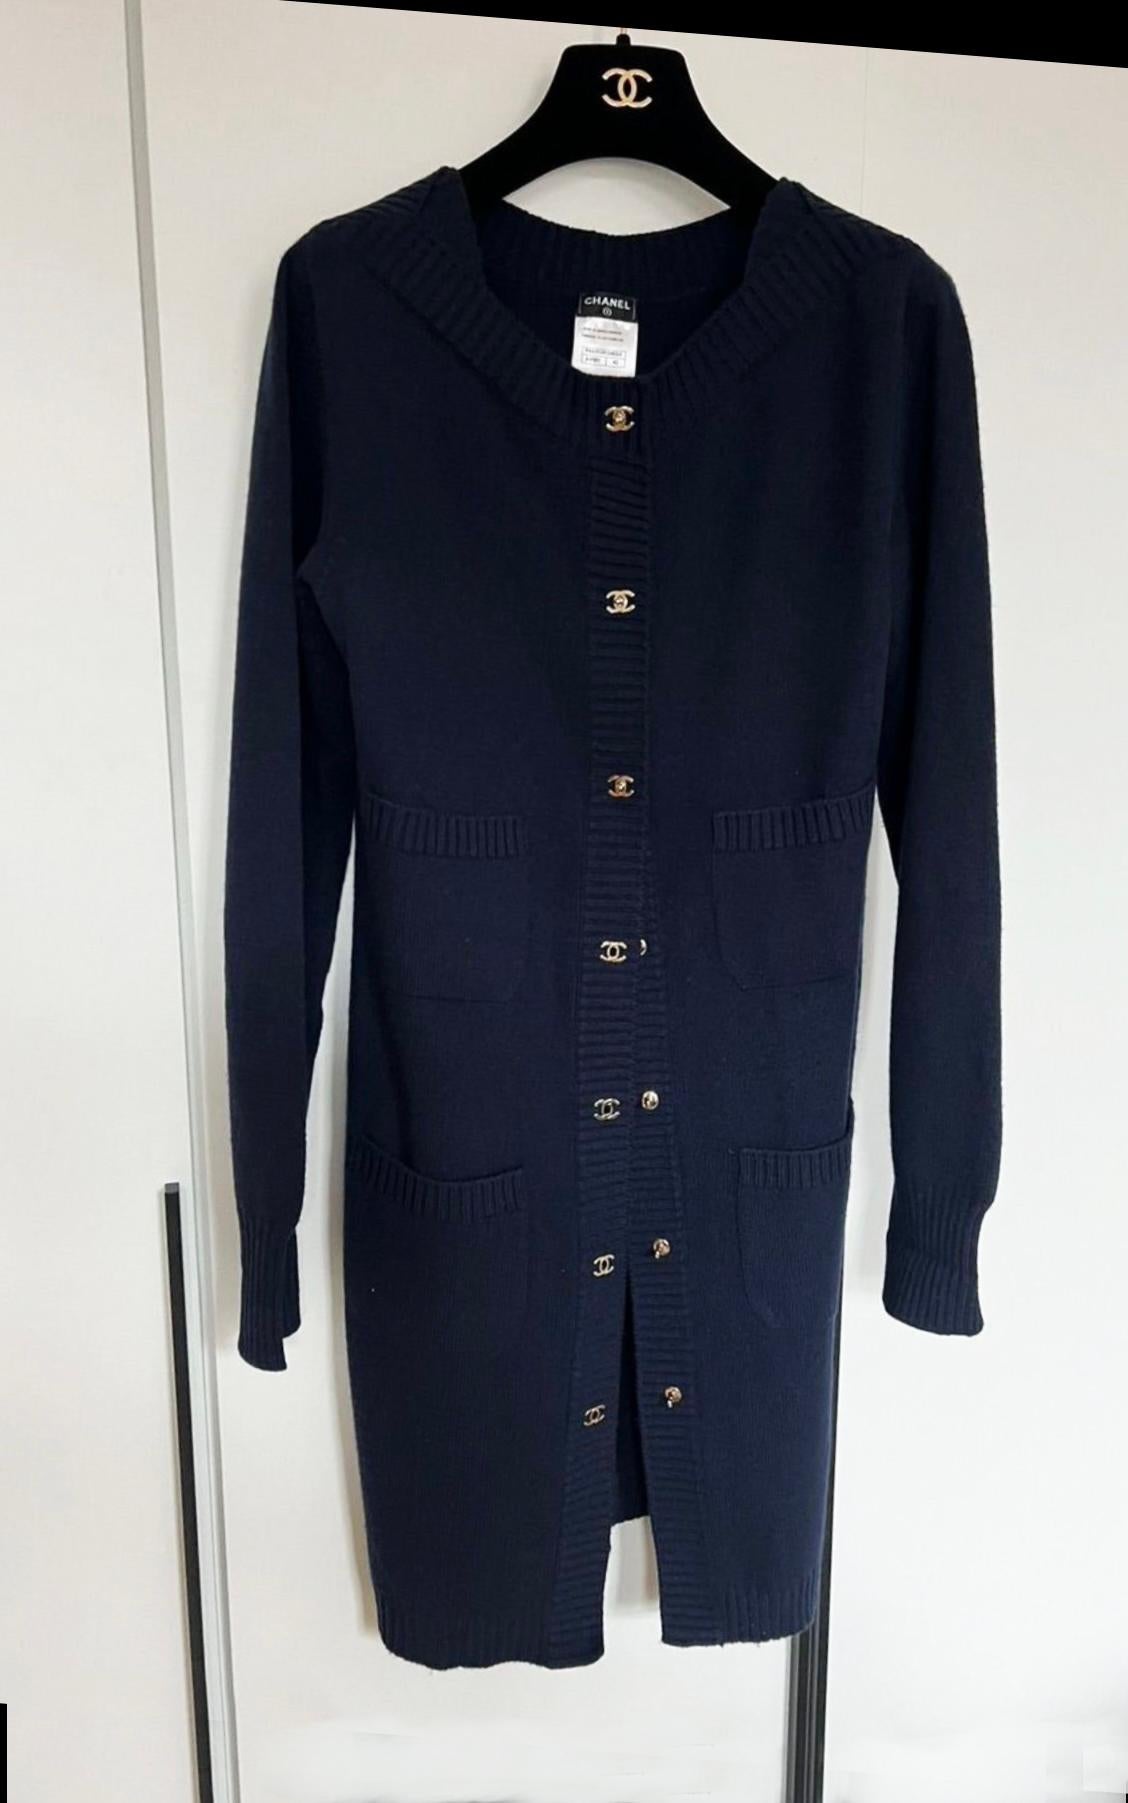 New Chanel navy cashmere cardigan with iconic CC Turnlock closure
Taille 42 FR.